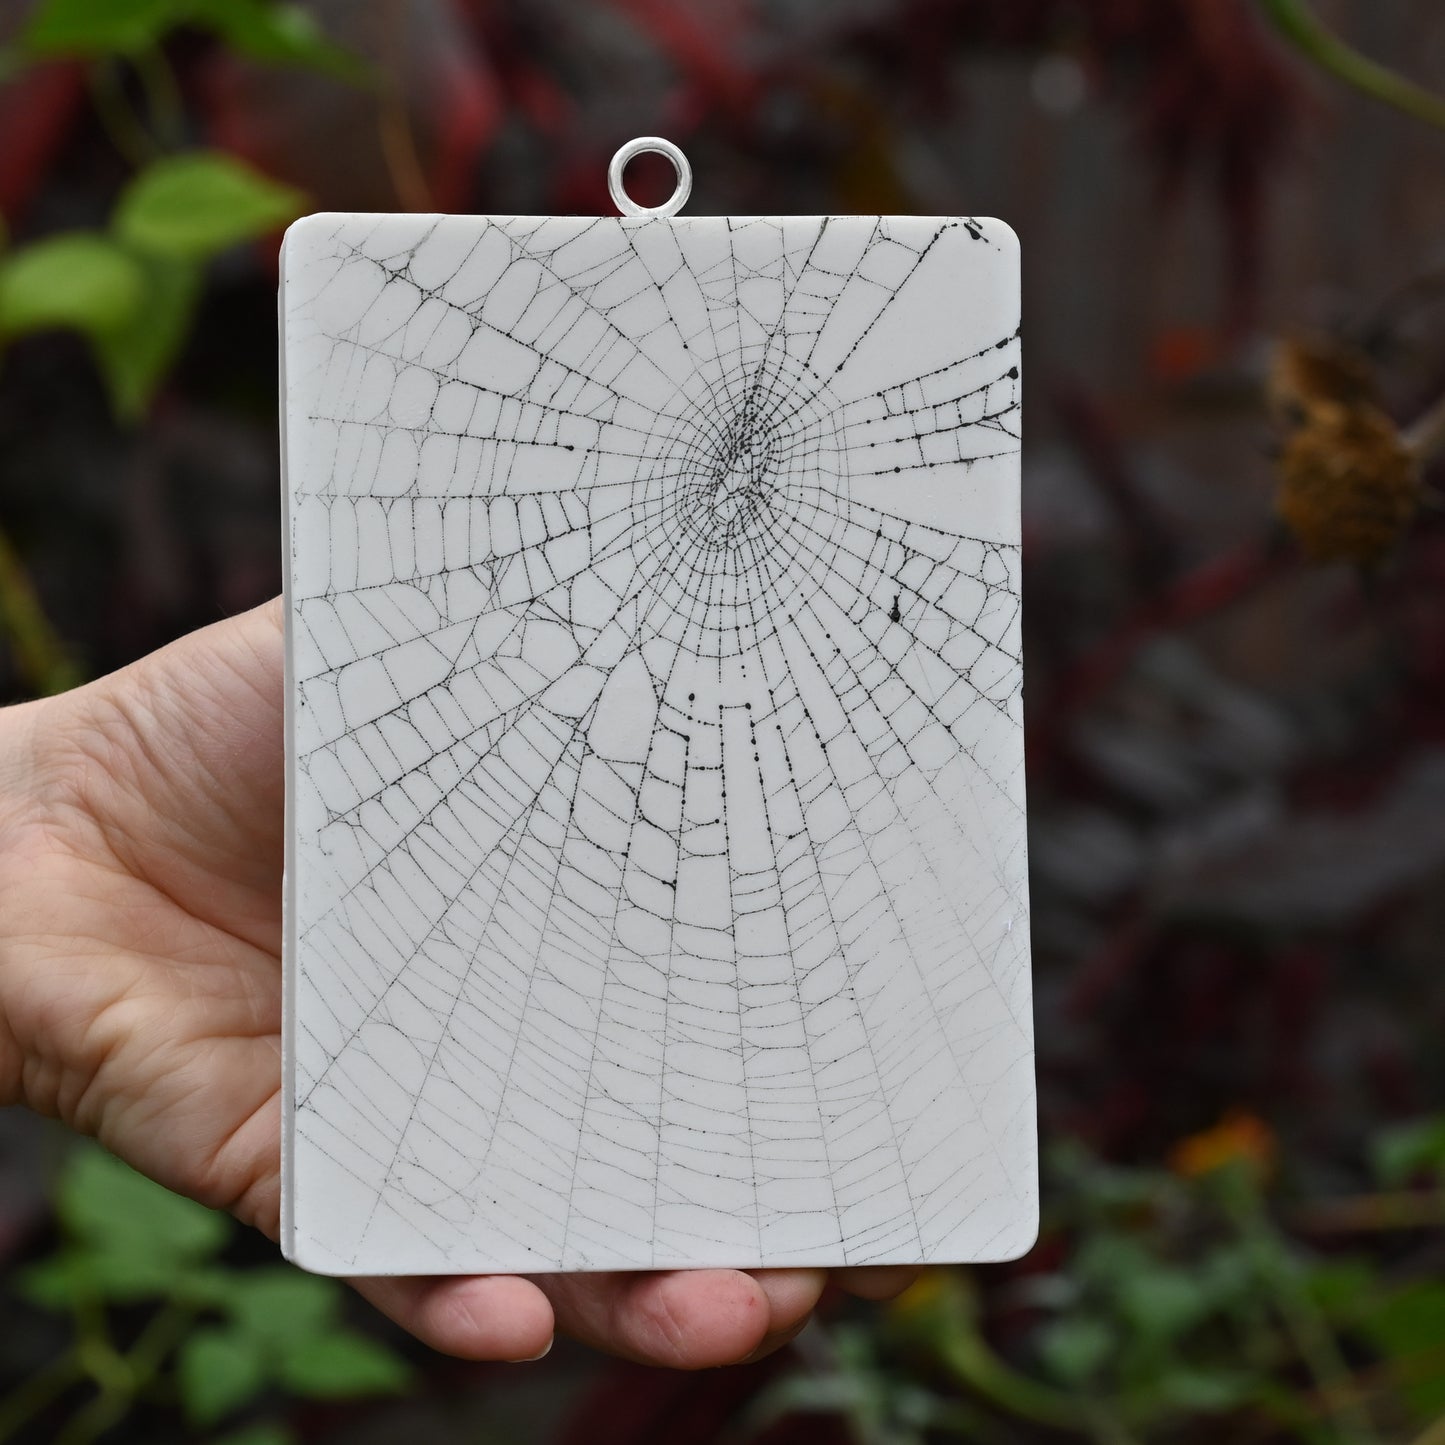 Web on Clay (133), Collected August 25, 2022